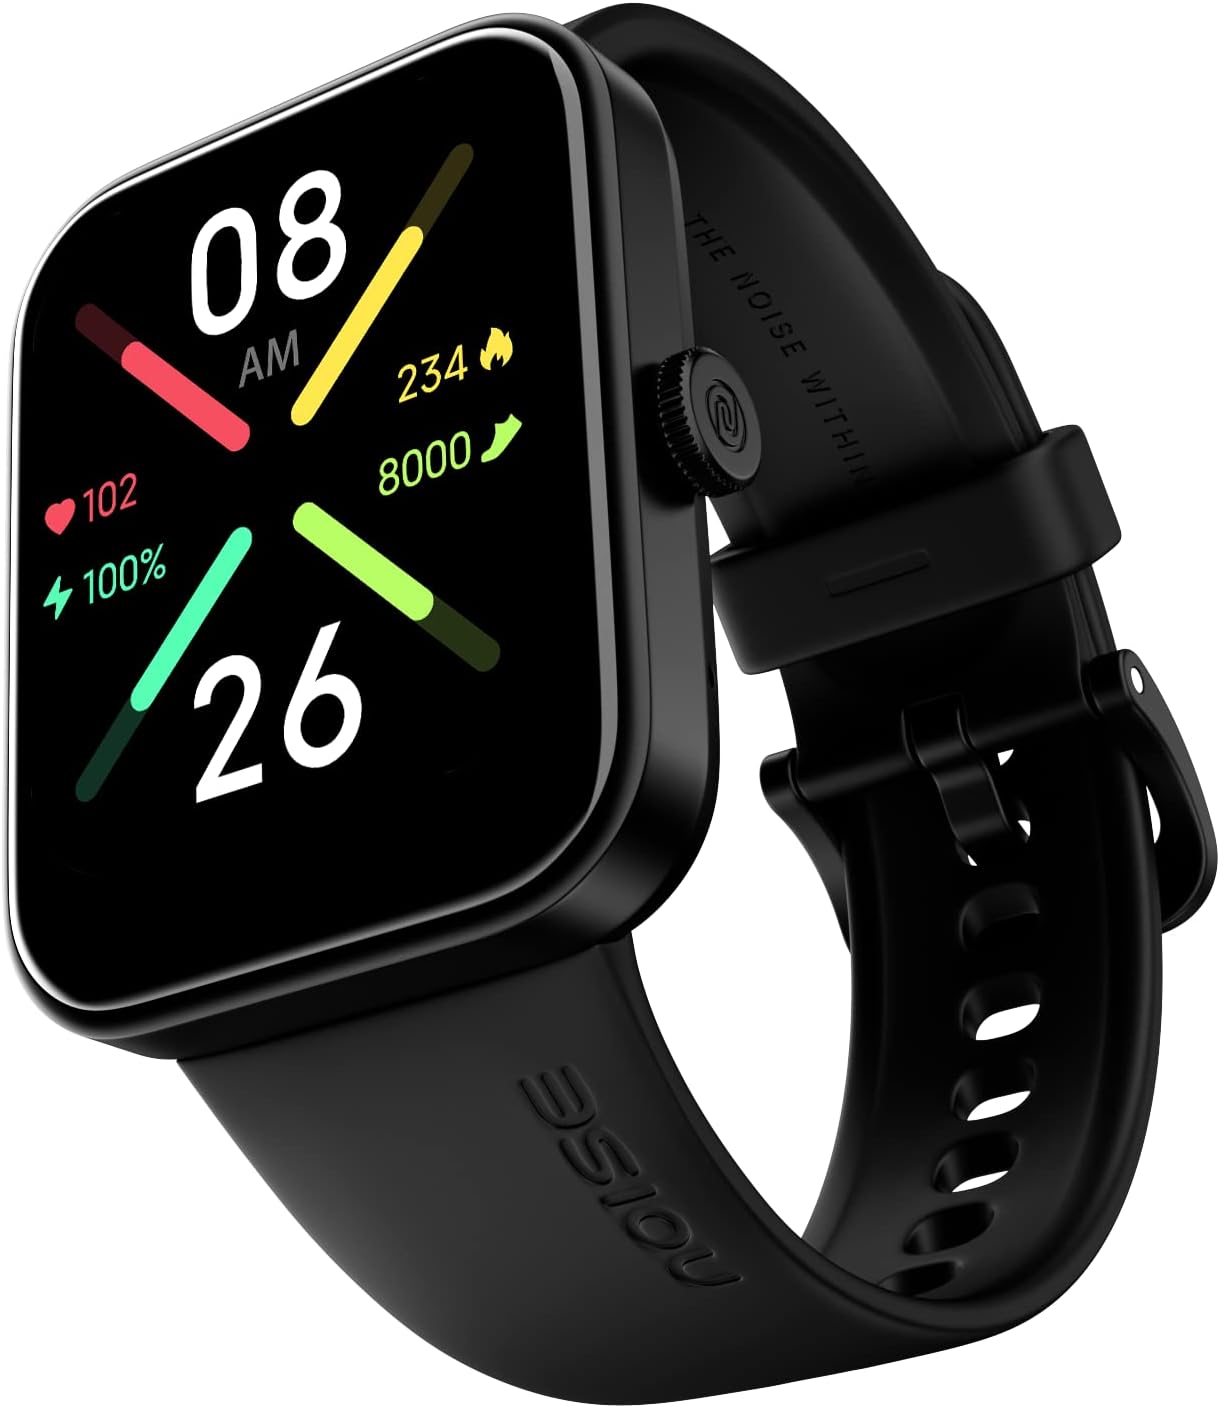 Noise Pulse Go Buzz Smart Watch with Advanced Bluetooth Calling, 1.69" TFT Display, SpO2, 100 Sports Mode with Auto Detection, Upto 7 Days Battery (2 Days with Heavy Calling) – Jet Black